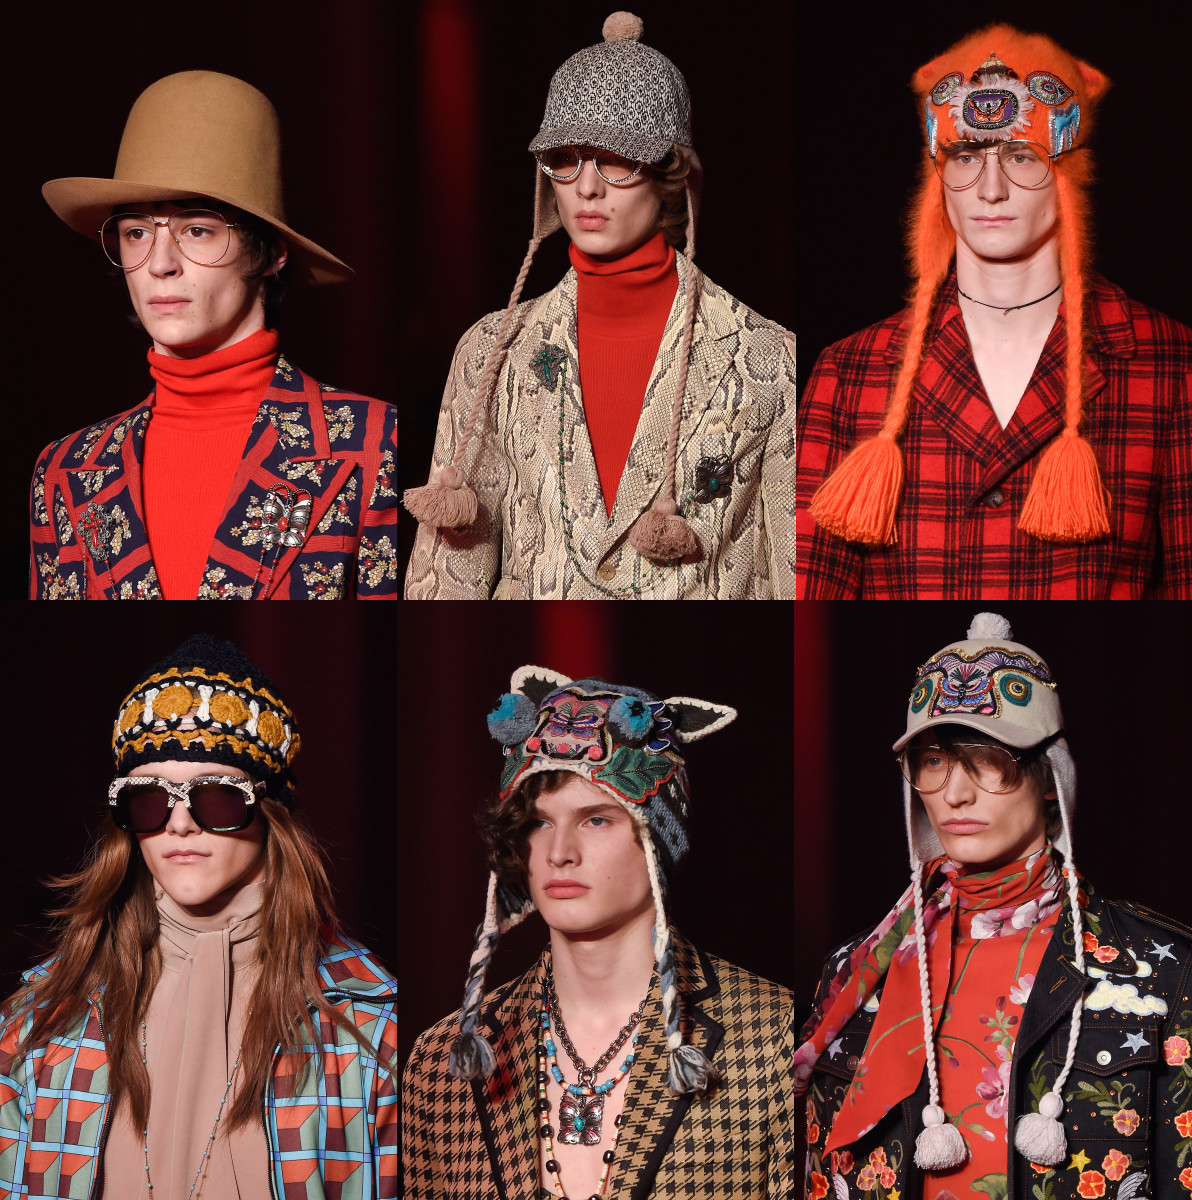 The Gucci fall 2016 men's collection. Photo: Imaxtree